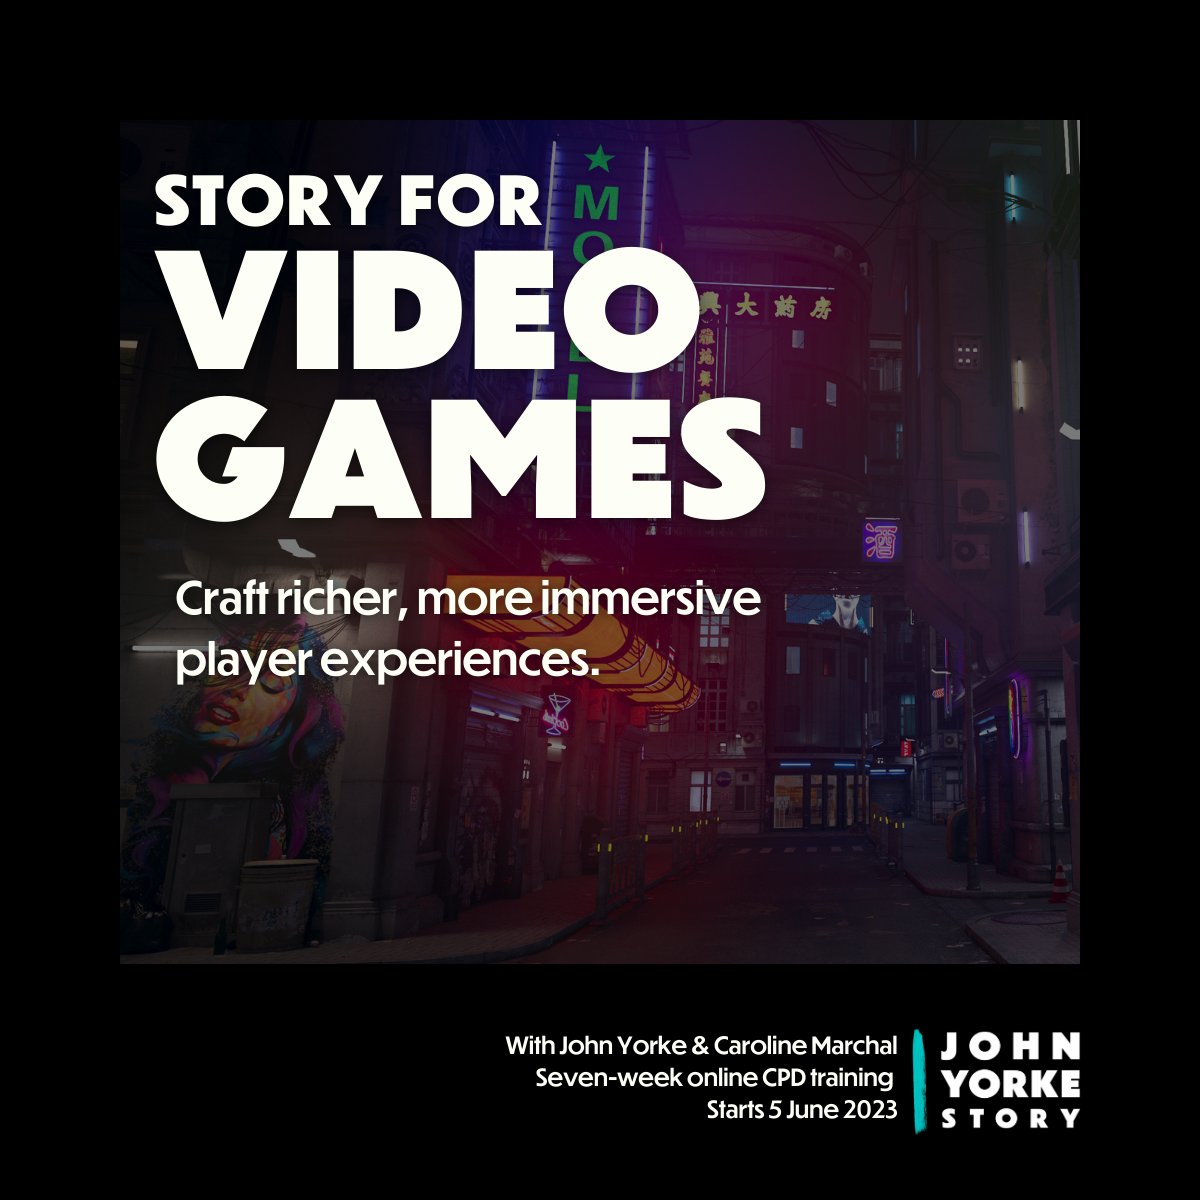 @asduskfallsgame Learn how to write compelling interactive stories with John Yorke & Caroline Marchal, whose game recently won Narrative Innovation of the Year at MCV/Develop. 

Our 7-week online CPD training starts 5 June:
johnyorkestory.com/course/story-f…

#narrativegame #gamedev #indiedev